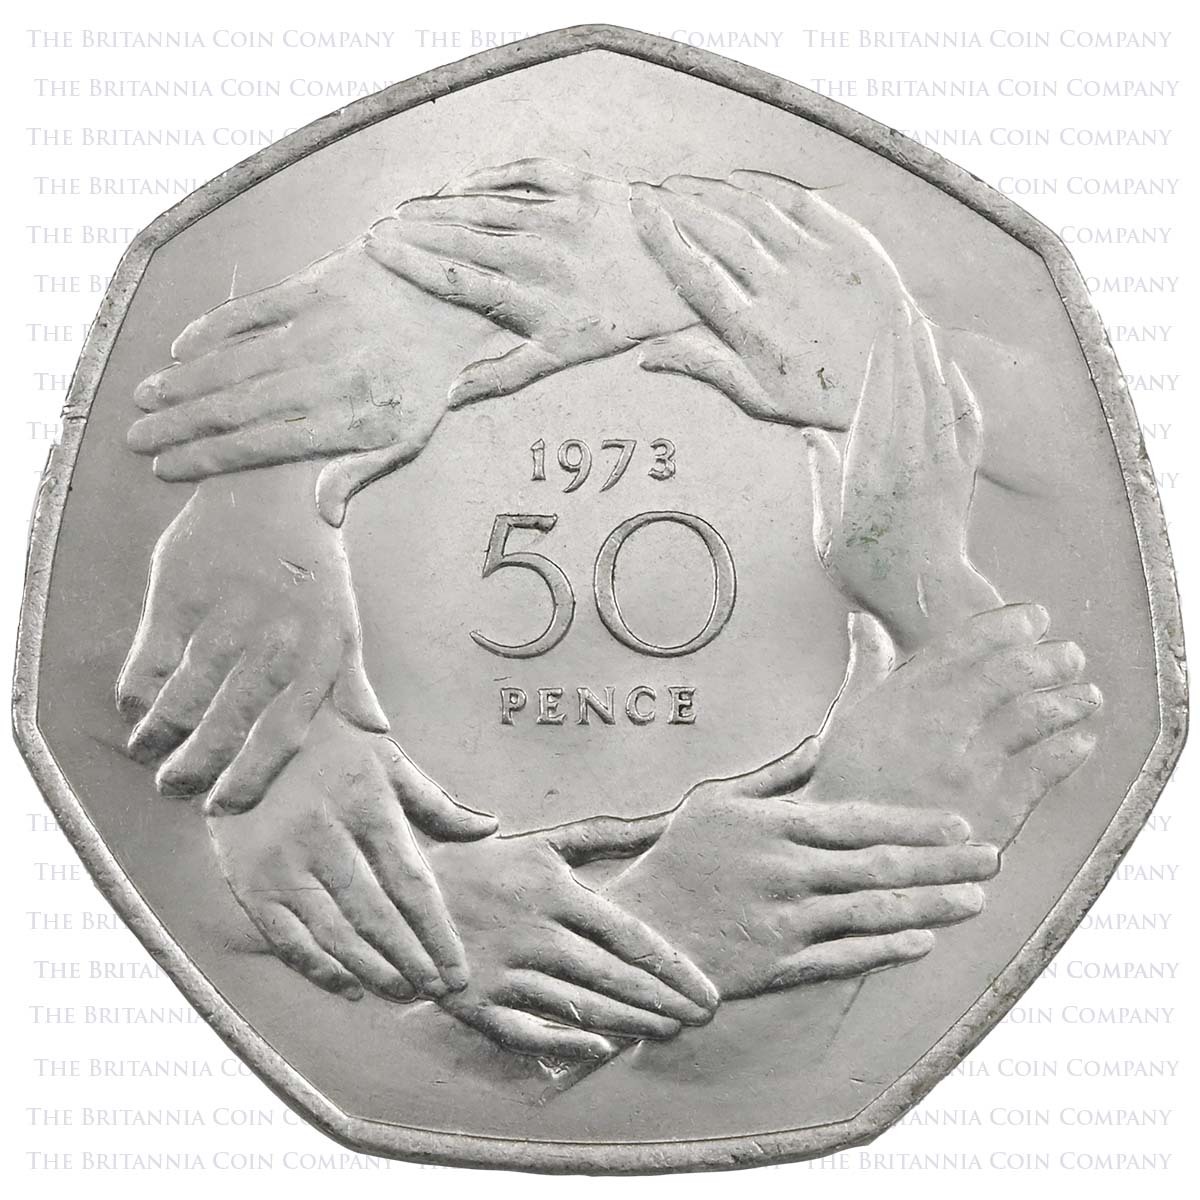 1973 European Economic Community Circulated Fifty Pence Coin Reverse